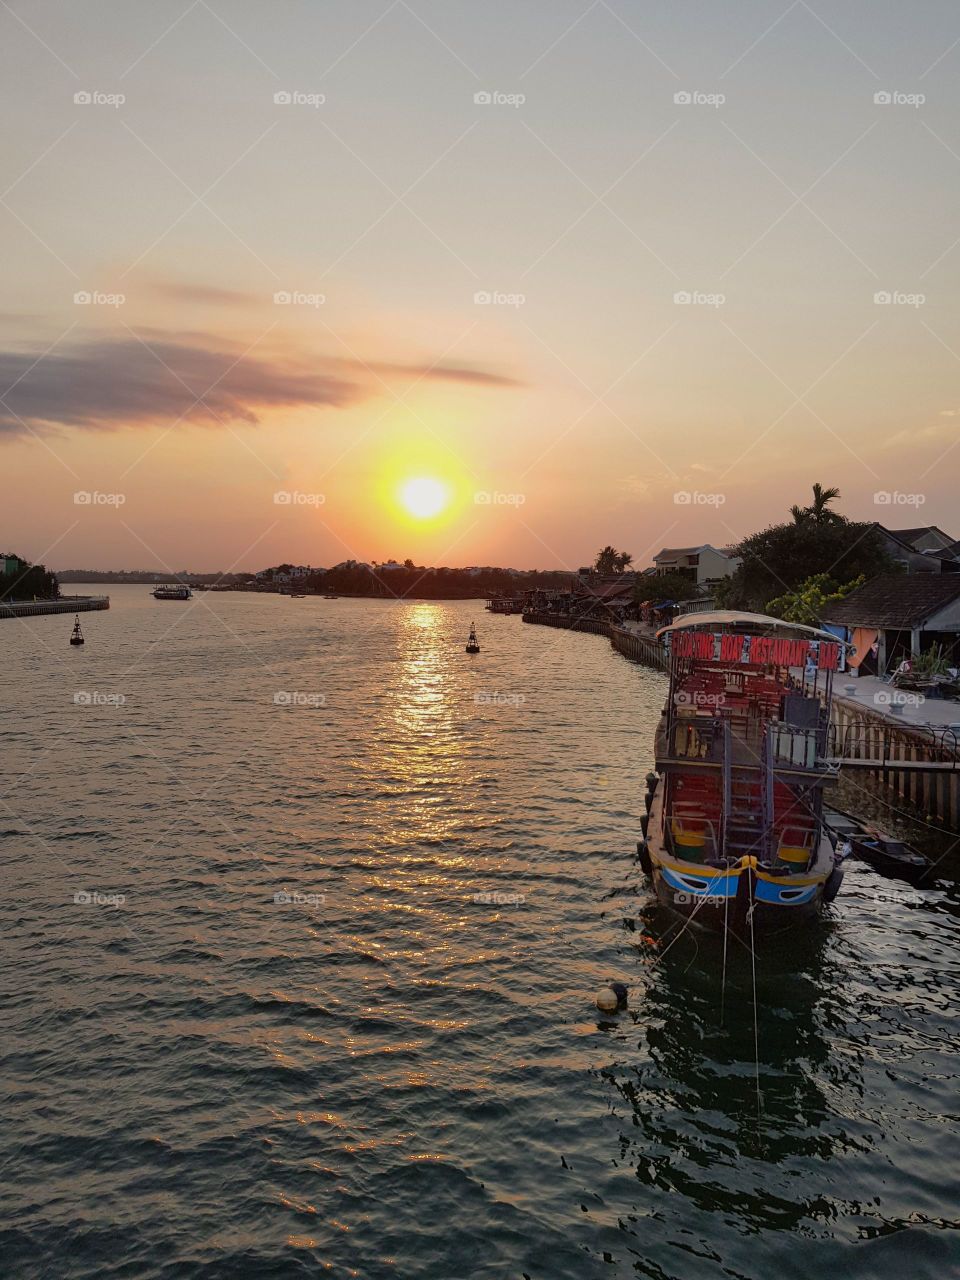 Beautiful sunset in Hoi An, Northen Vietnam. Perfect place to sit down, relax and spend time with a loved one until the sun goes down.